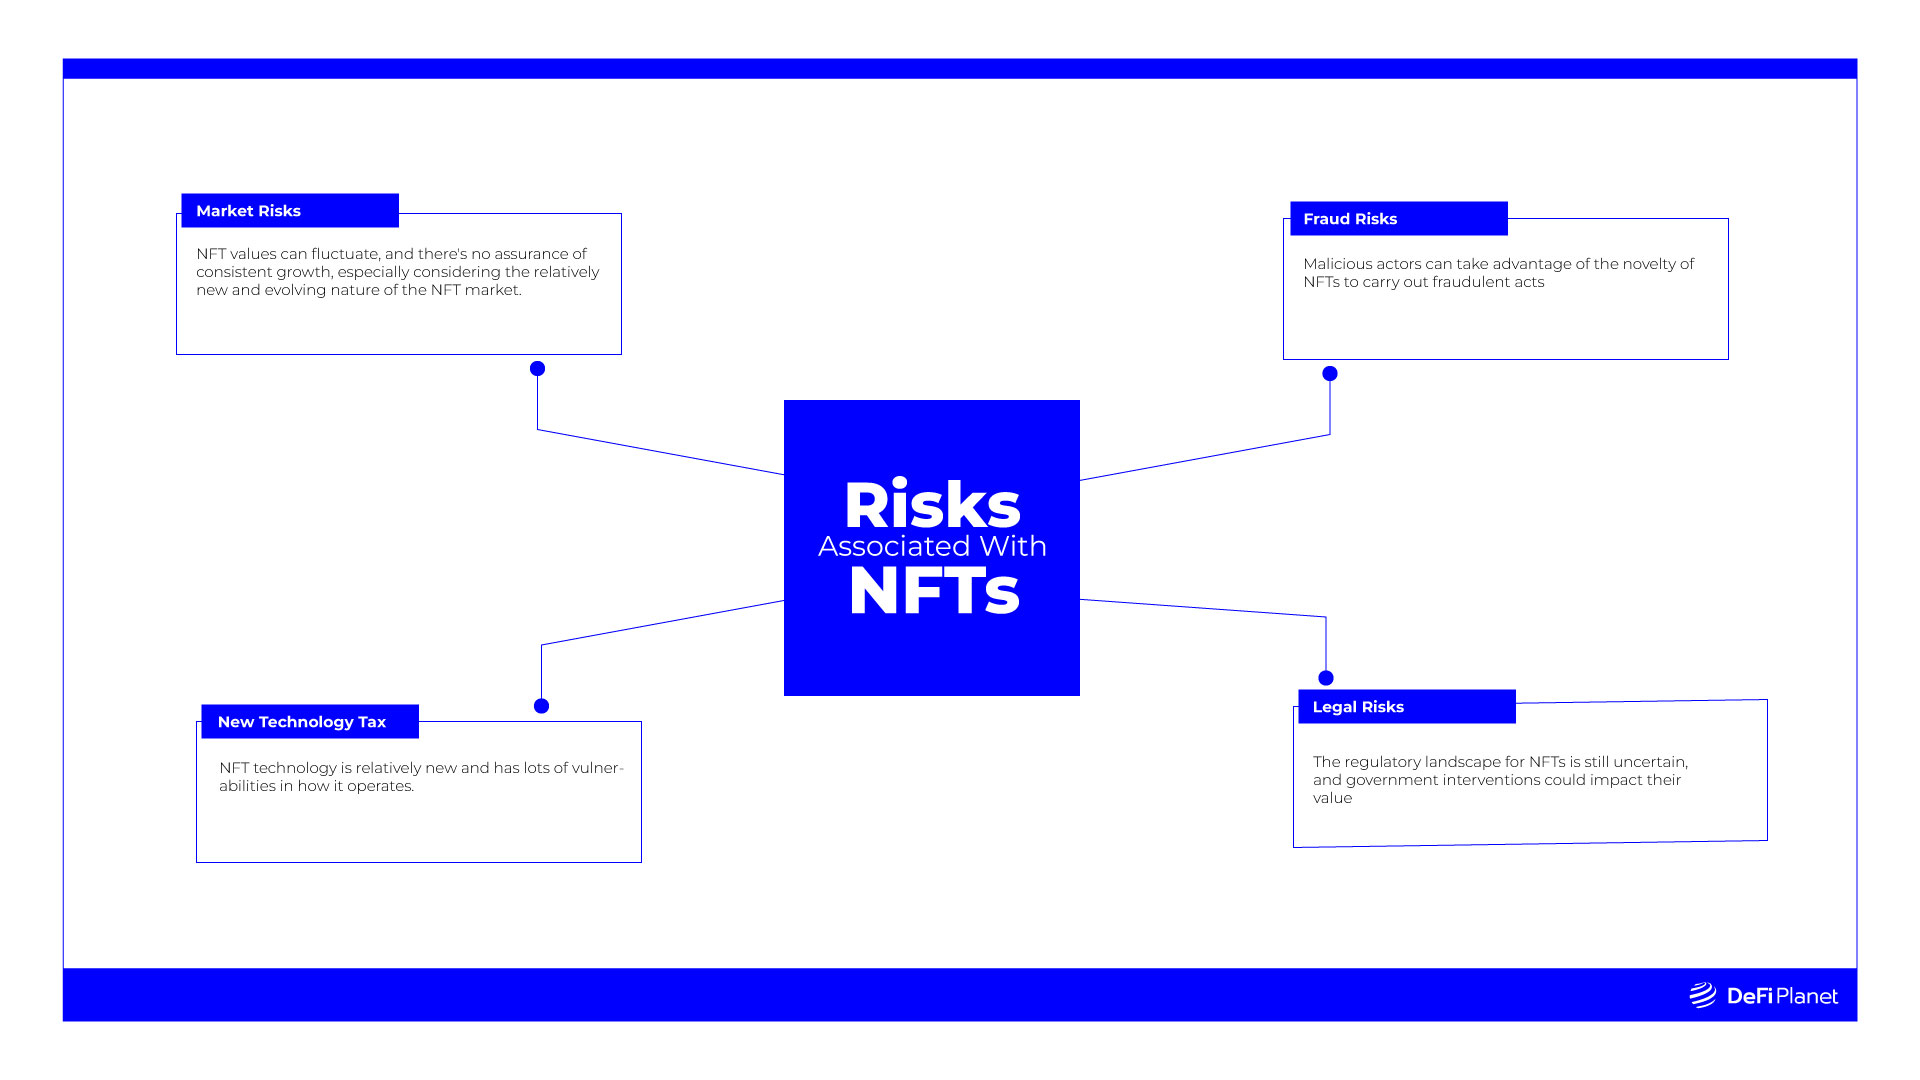 Diagram showing the Risks Associated With NFTs on DeFi planet